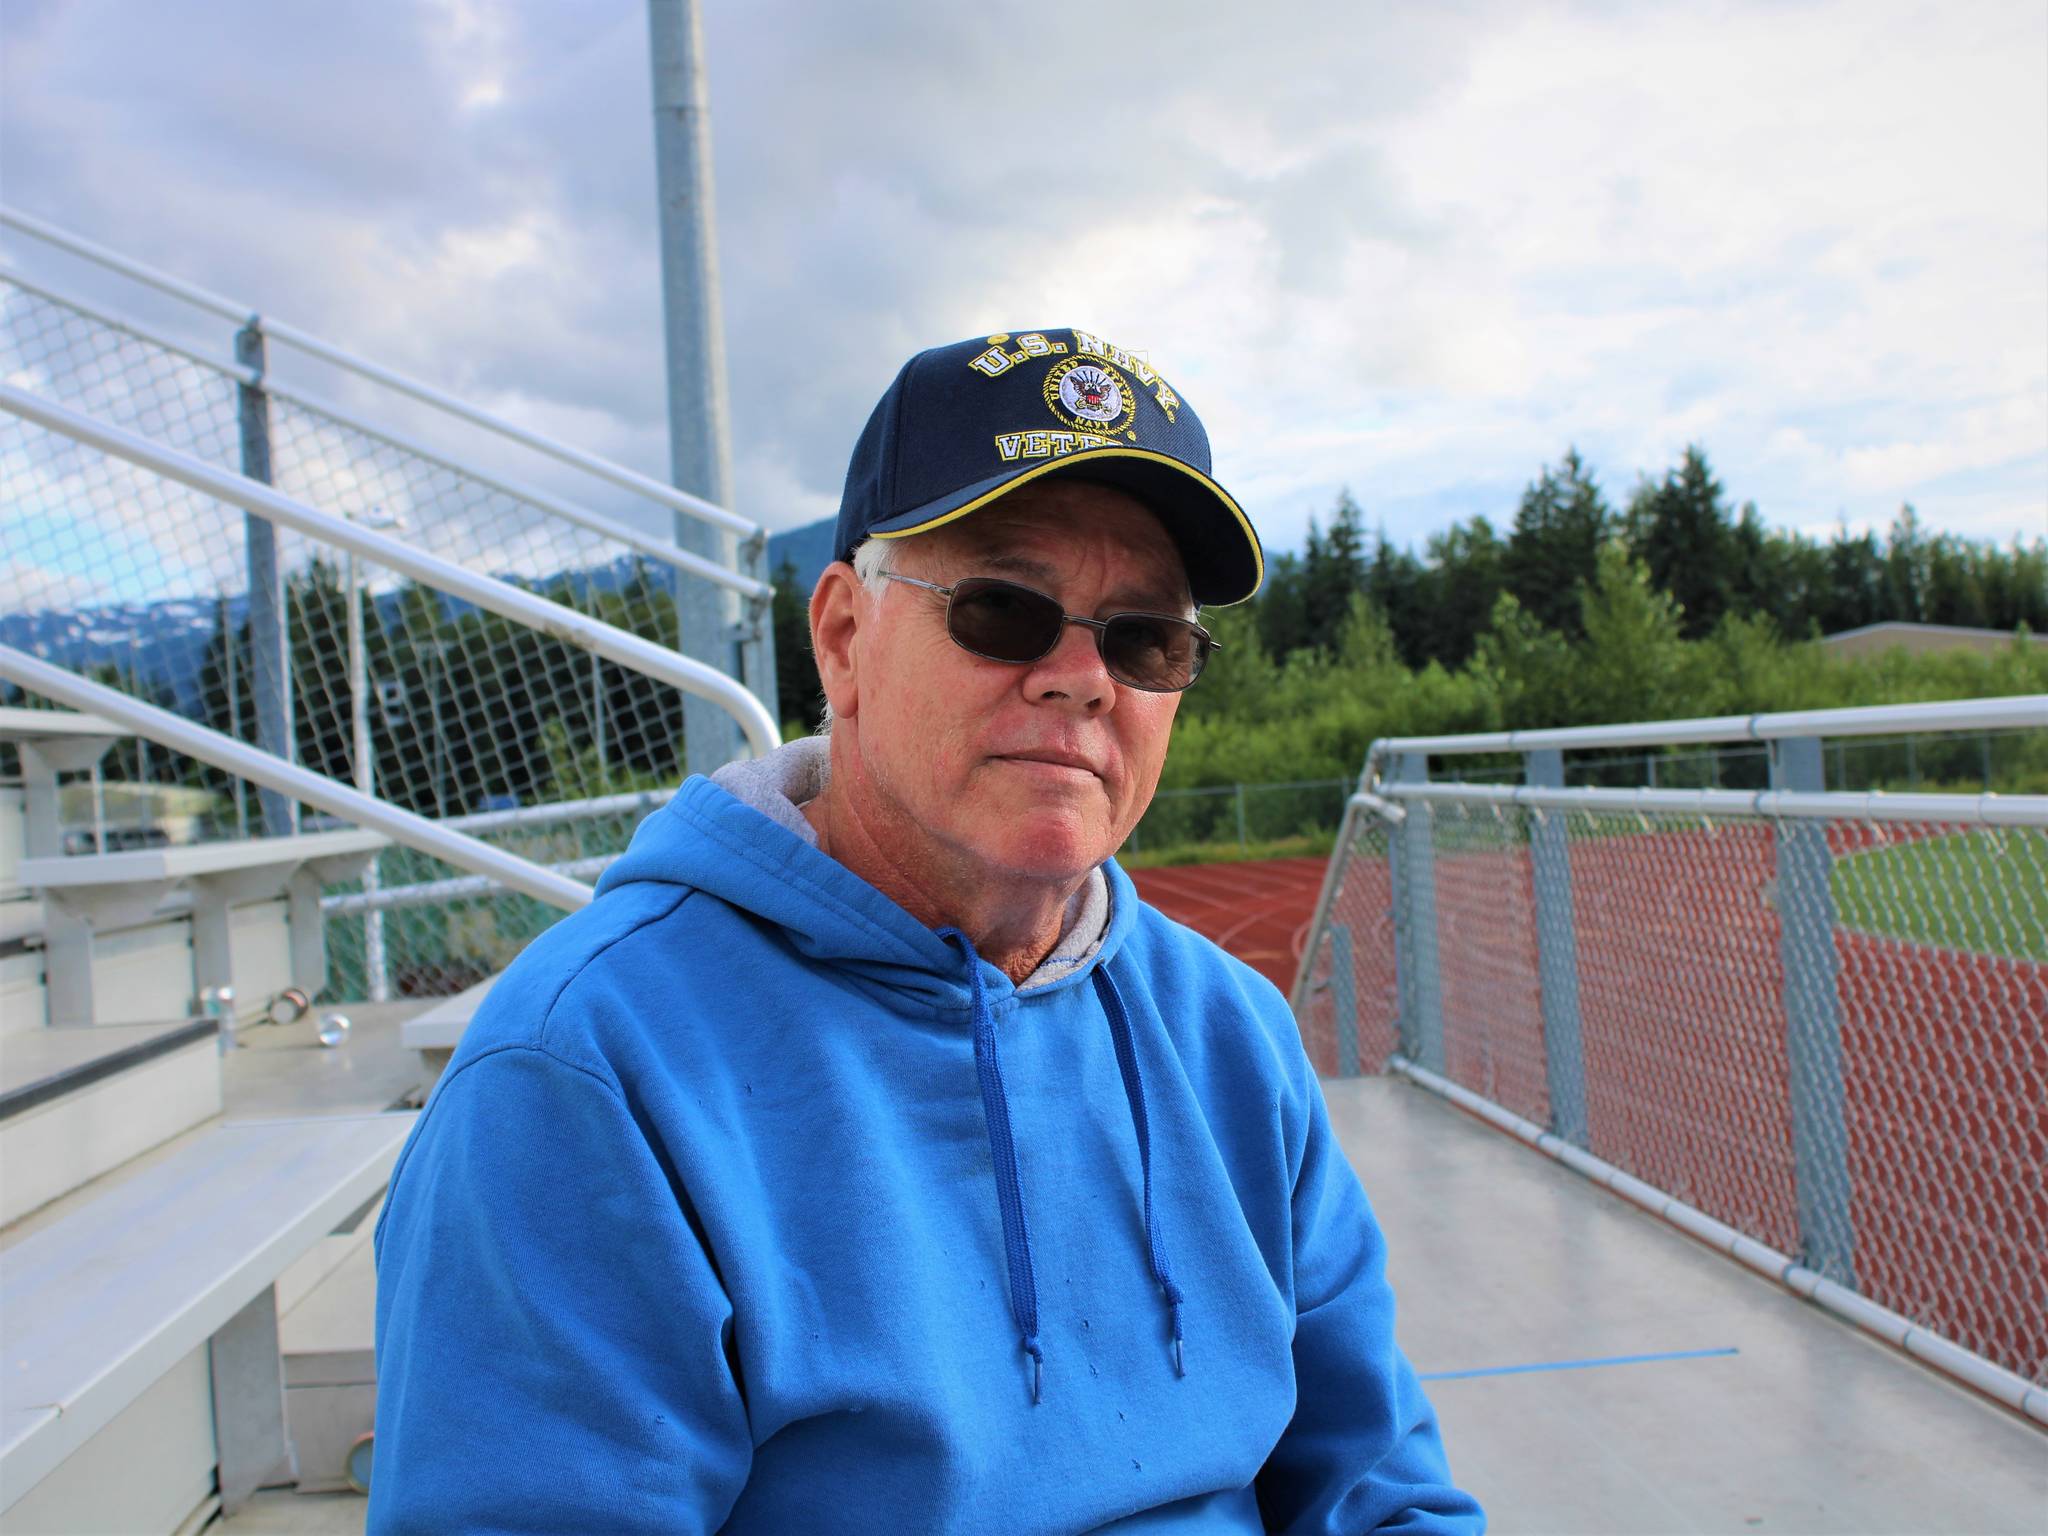 This Aug. 5 picture shows Thomas Buzard, who is a candidate for an open seat on the Juneau Board of Education. (Dana Zigmund/Juneau Empire)